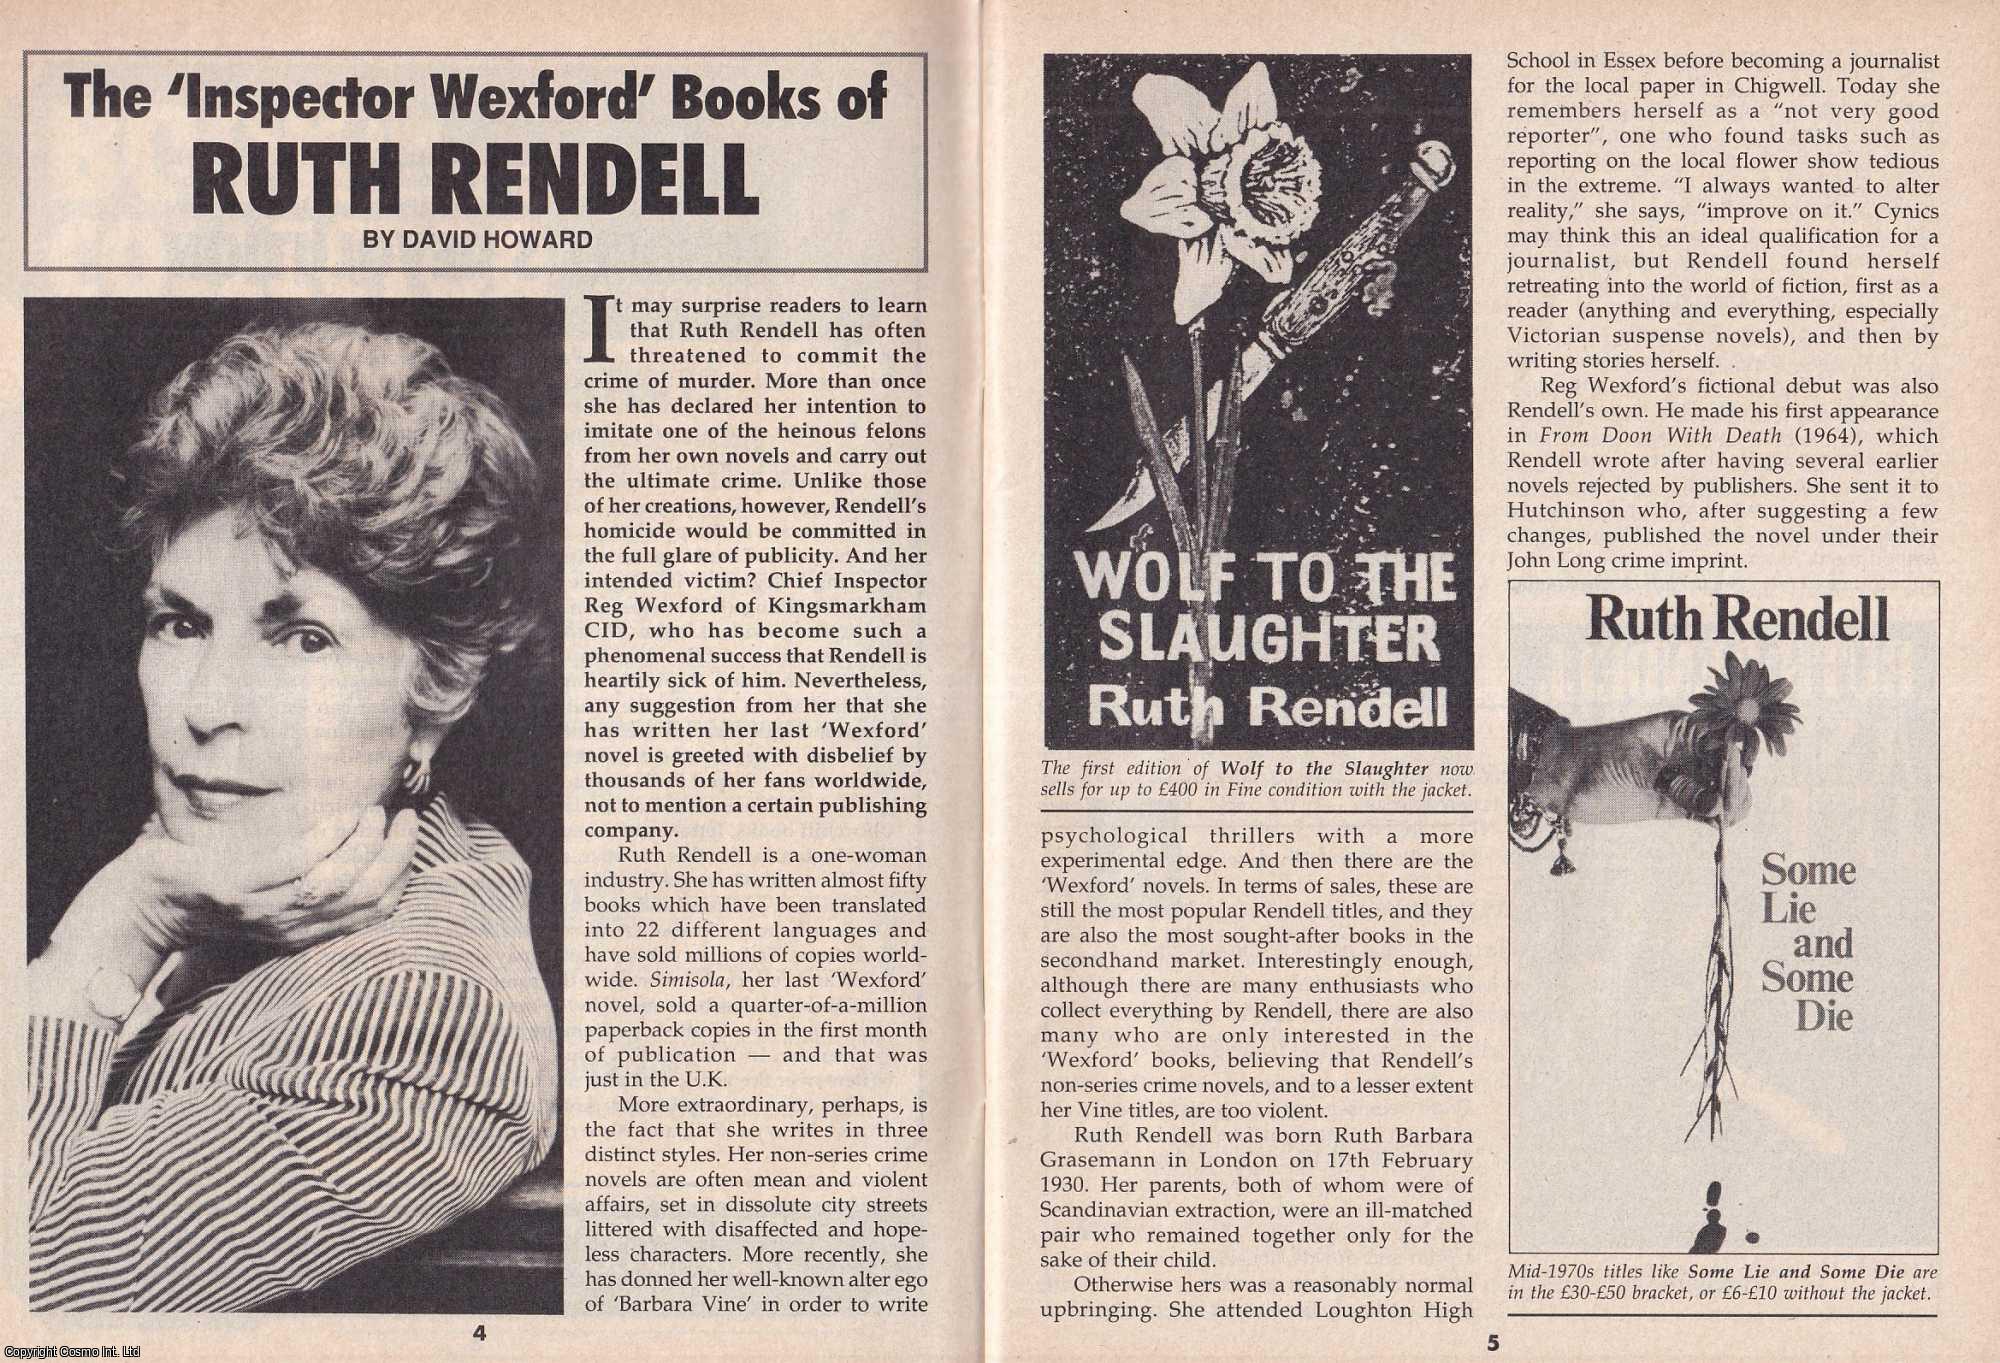 David Howard - The Inspector Wexford Books of Ruth Rendell. This is an original article separated from an issue of The Book & Magazine Collector publication, 1997.